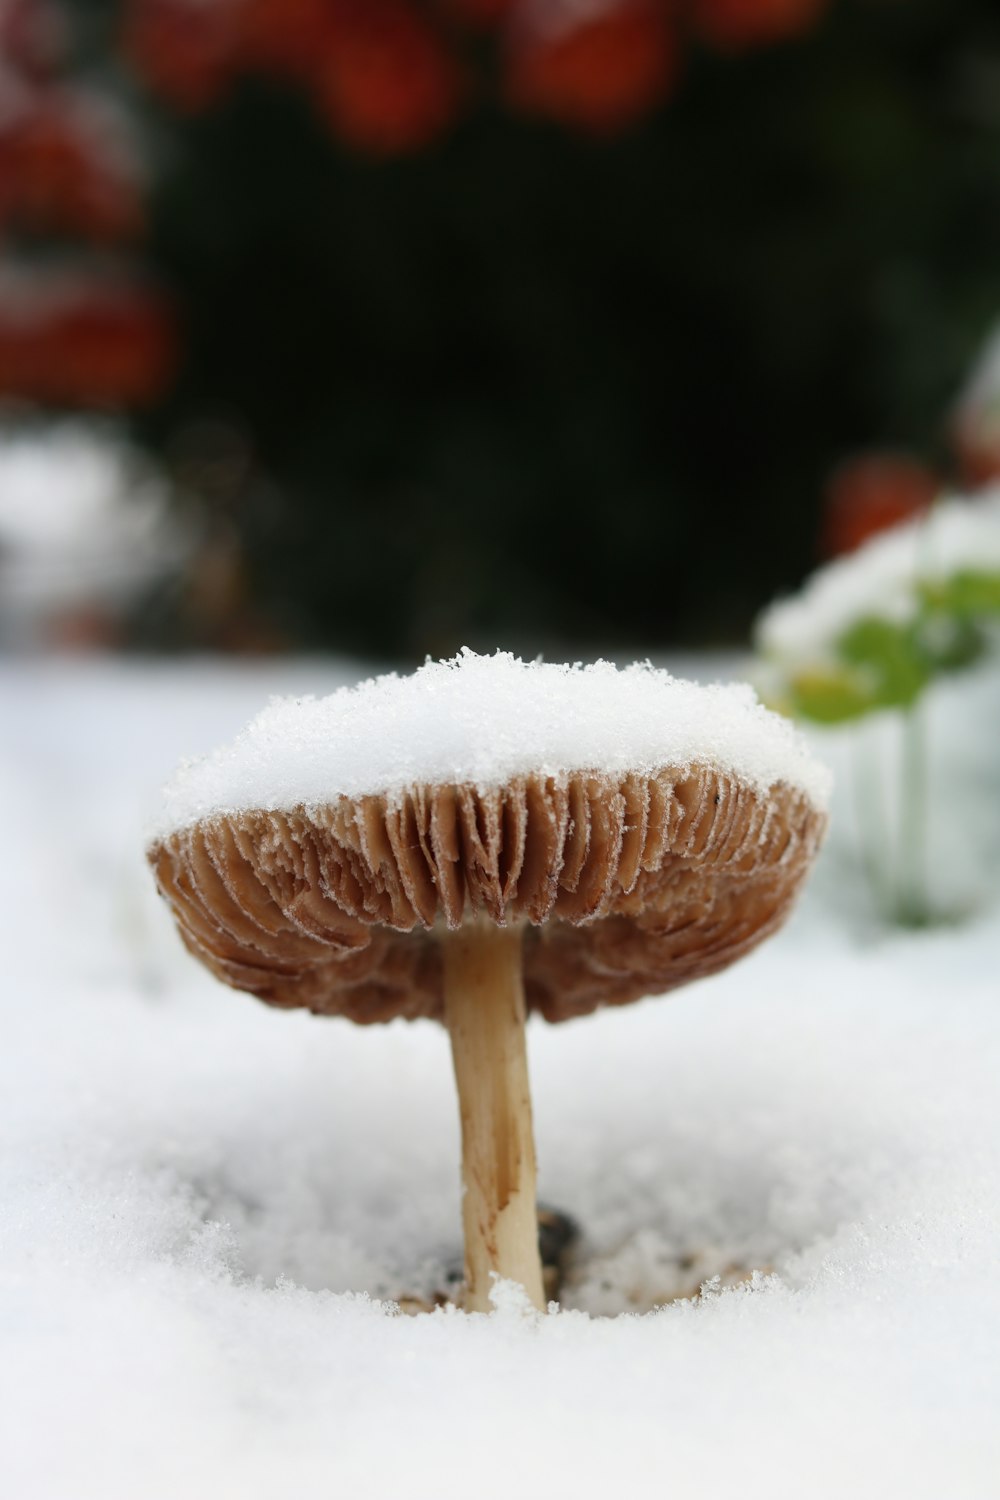 a mushroom that is sitting in the snow